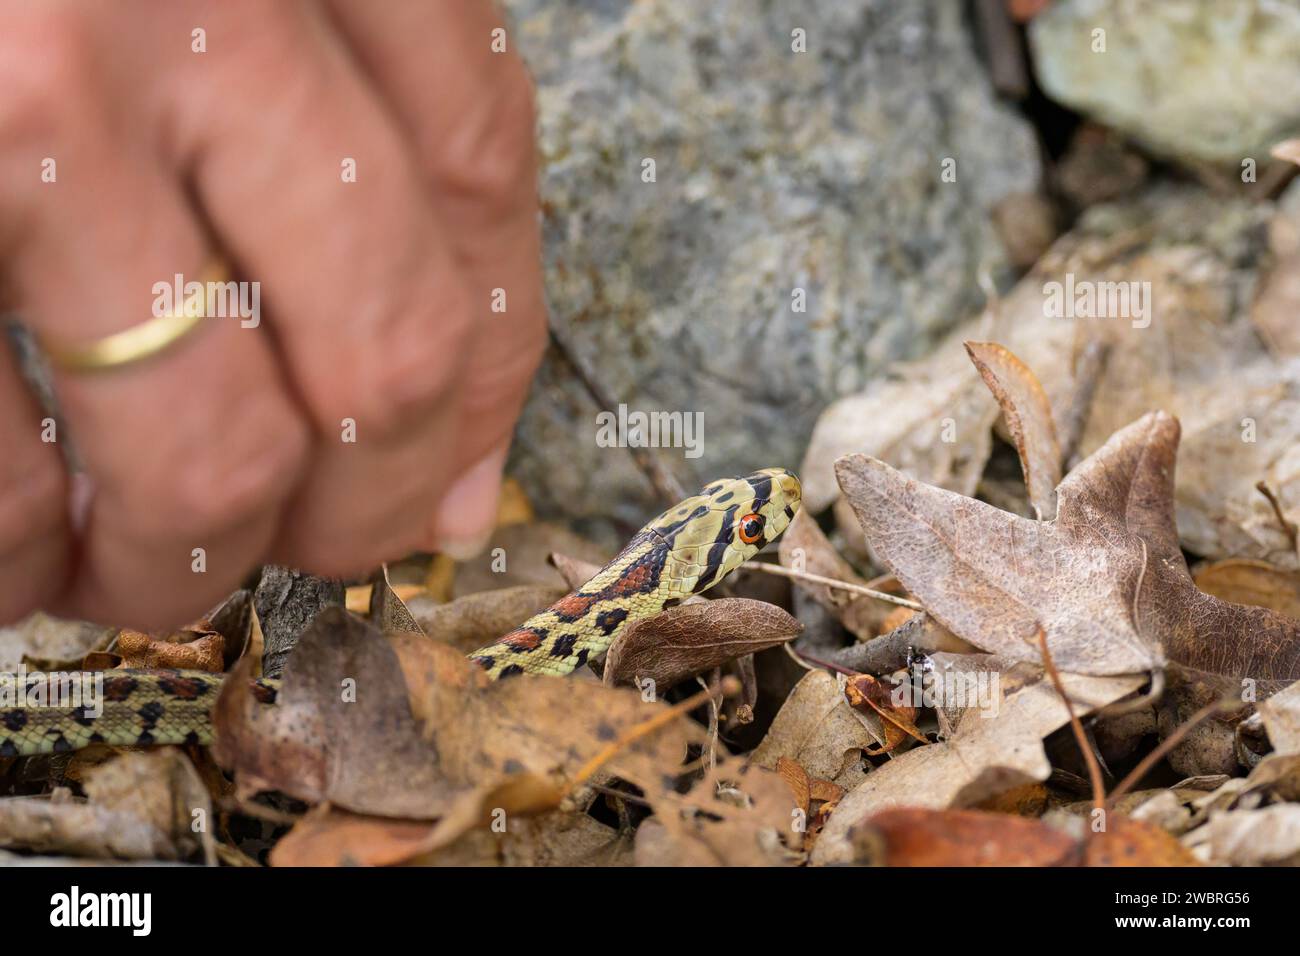 Hand of a woman catching a very young leopard snake on the ground, autumn in Croatia Stock Photo